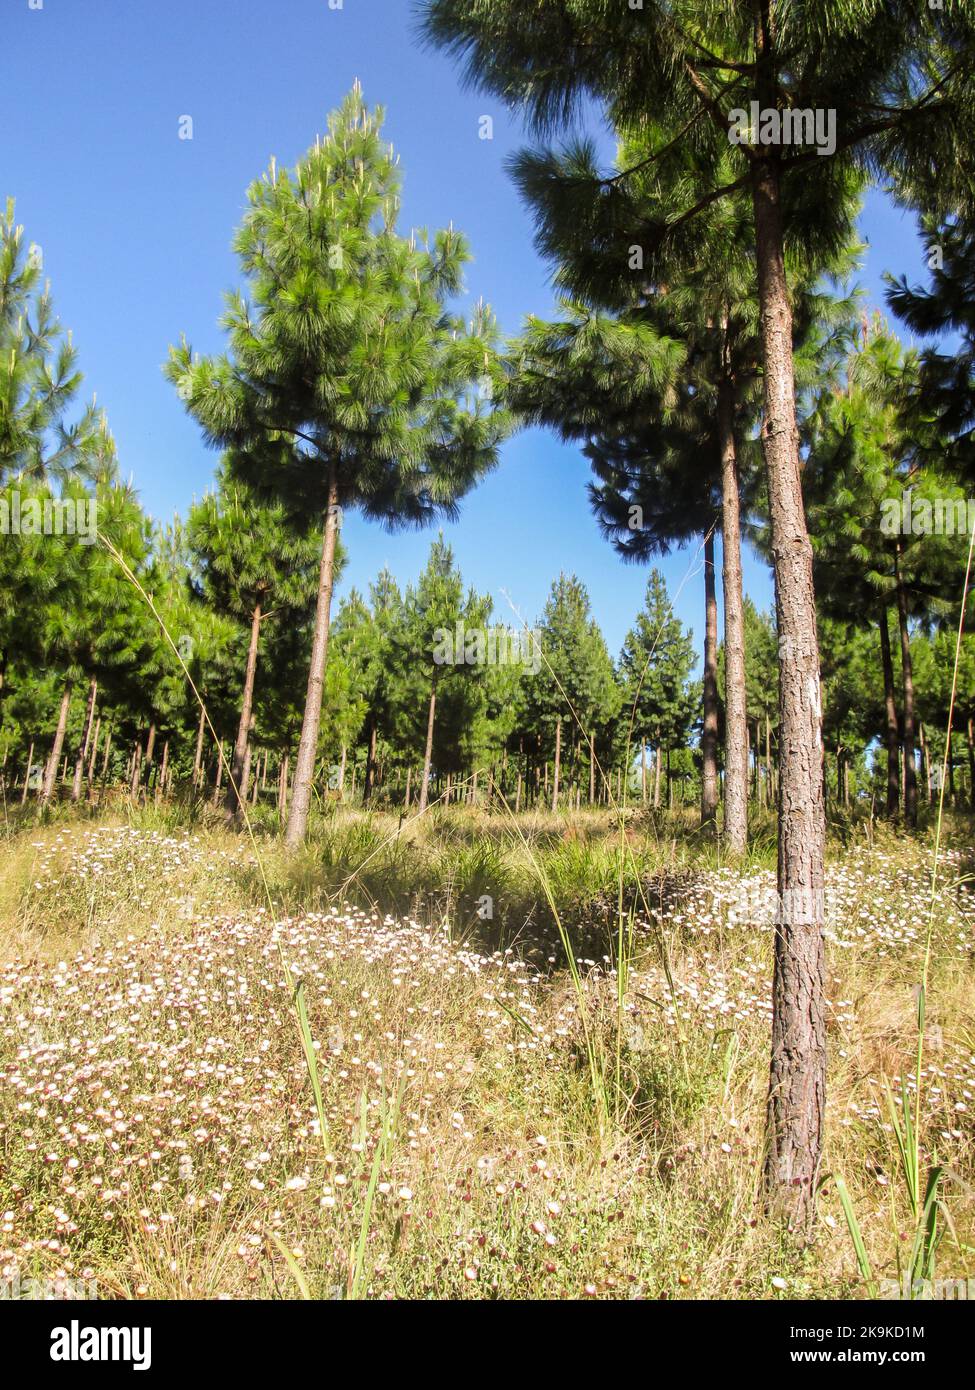 A carpet of pink and white sewejaartjies (Helichrysum flowers) growing under a pine plantation in the Kaapsche hoop region in South Africa Stock Photo